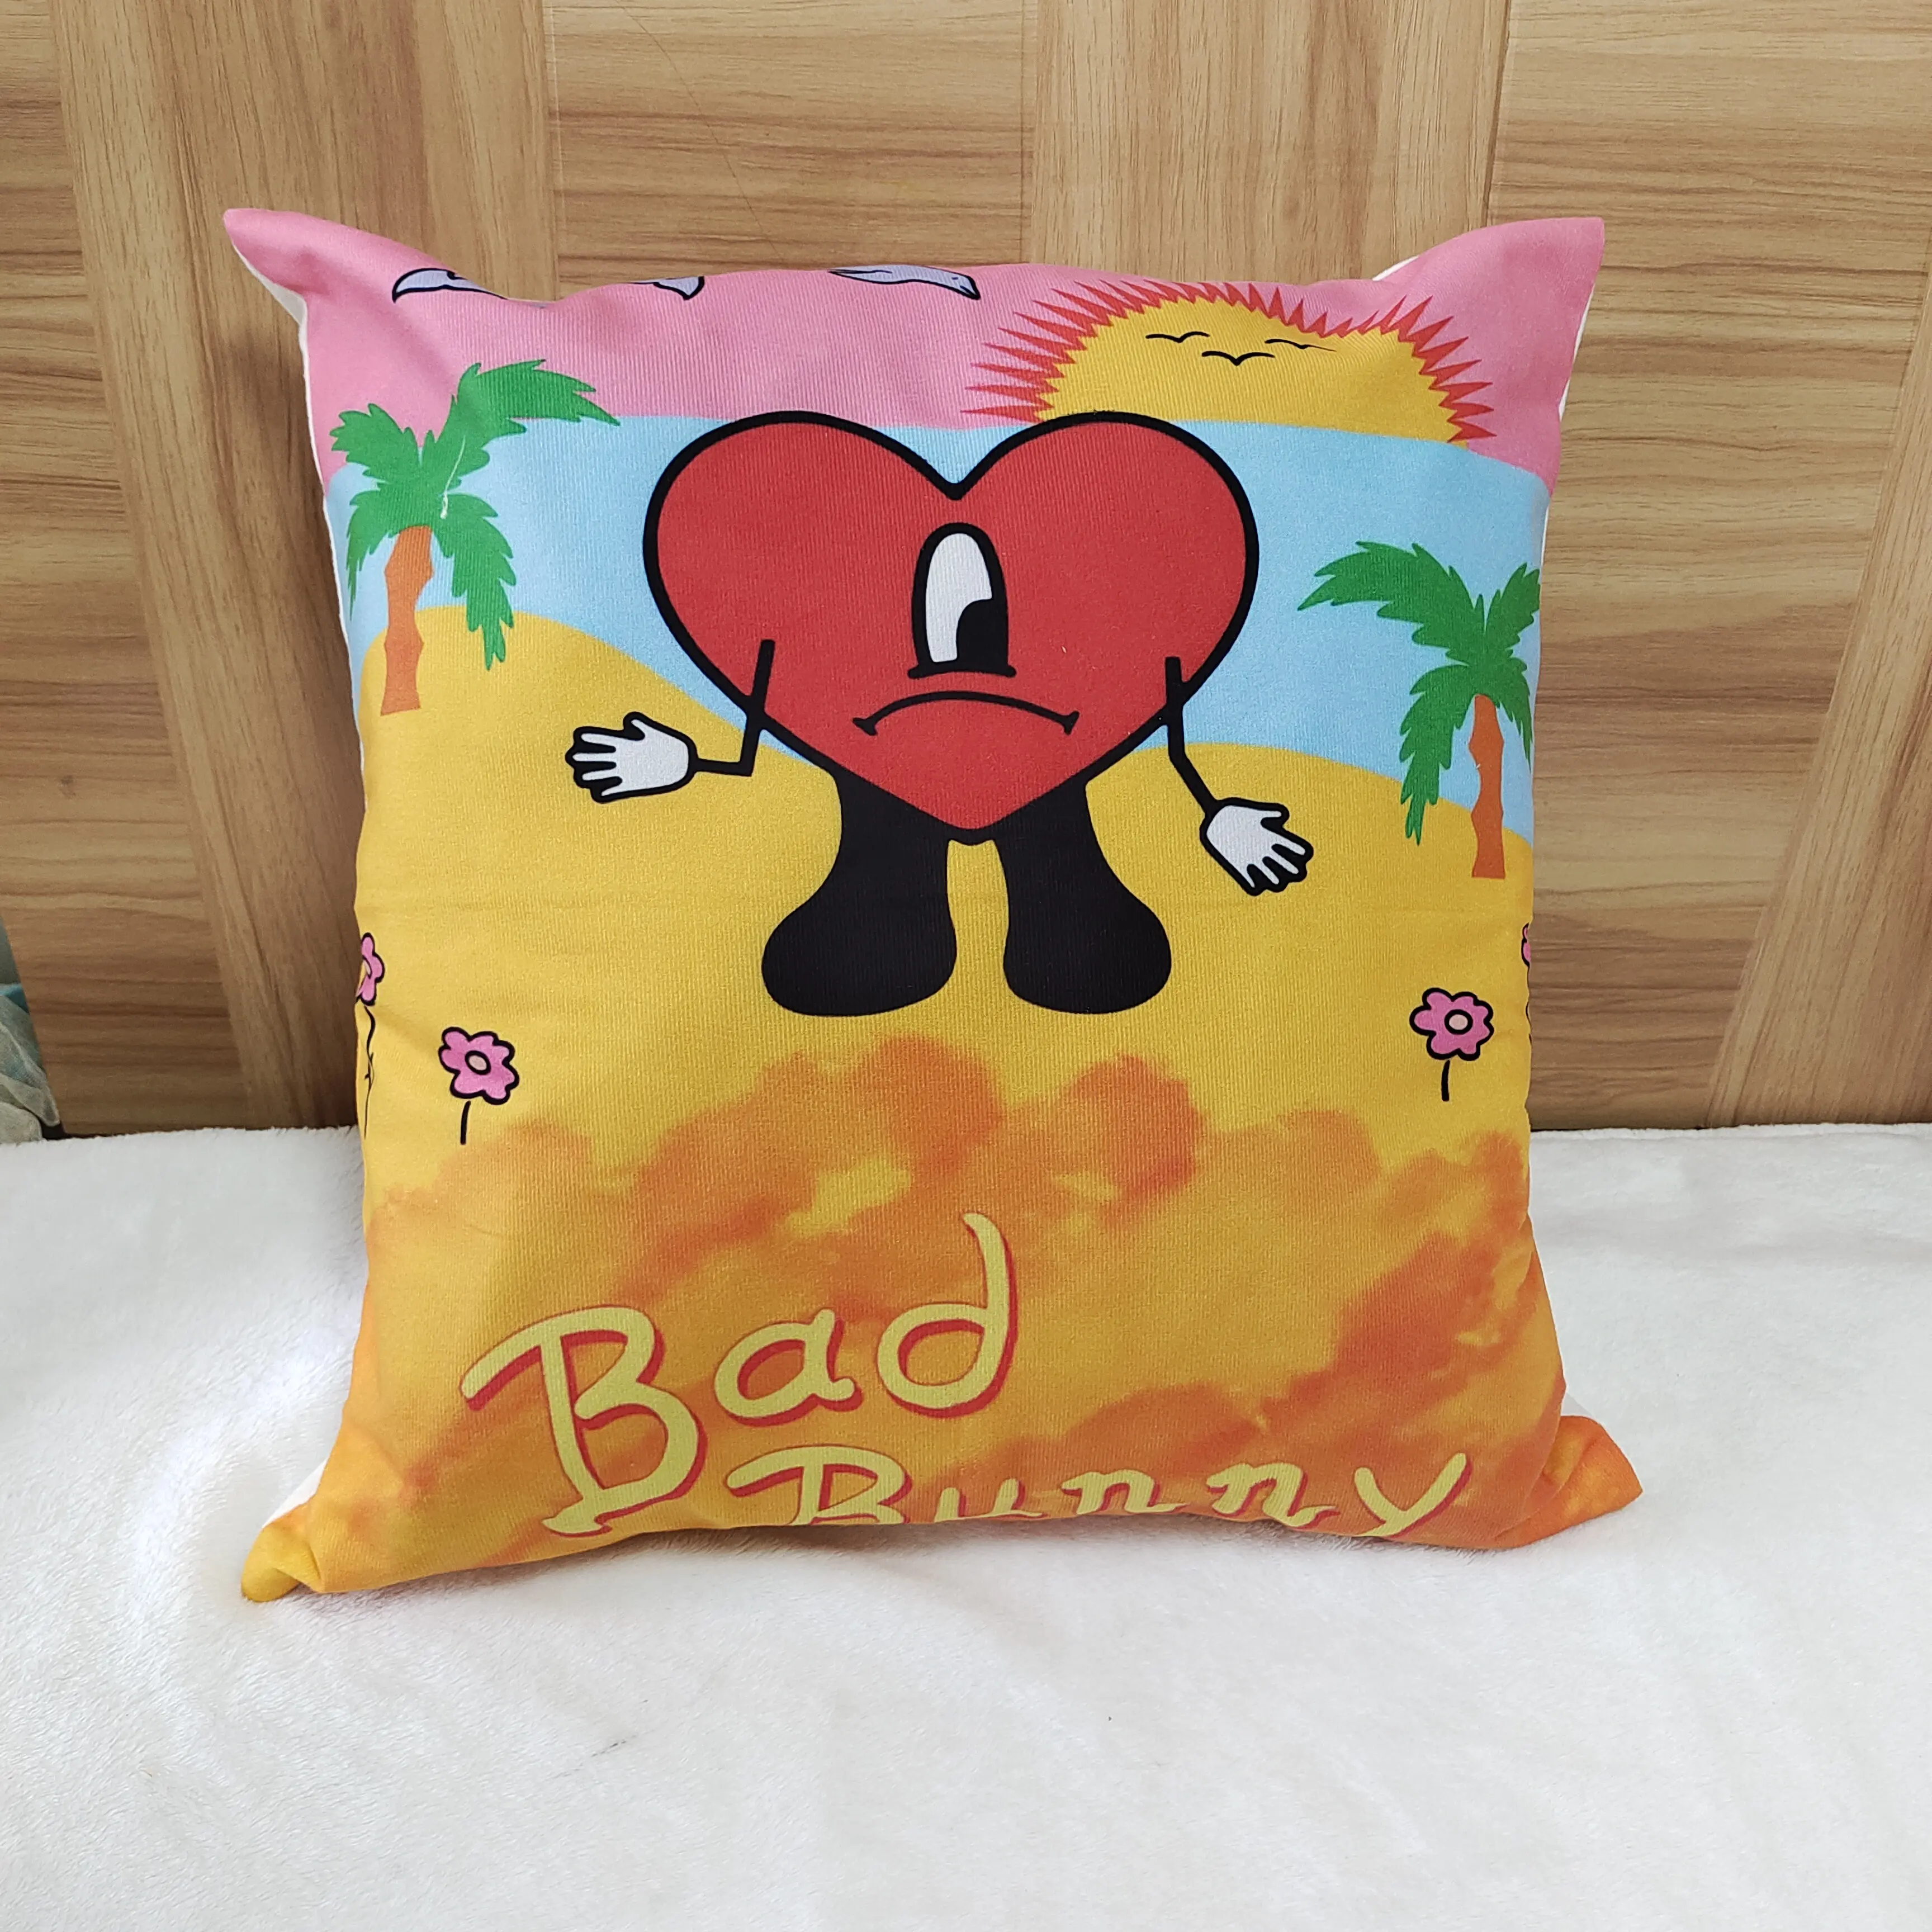 Different material Cartoon anime design sequin cotton polyester printed cushion throw pillows custom bad bunny Pillow Cases